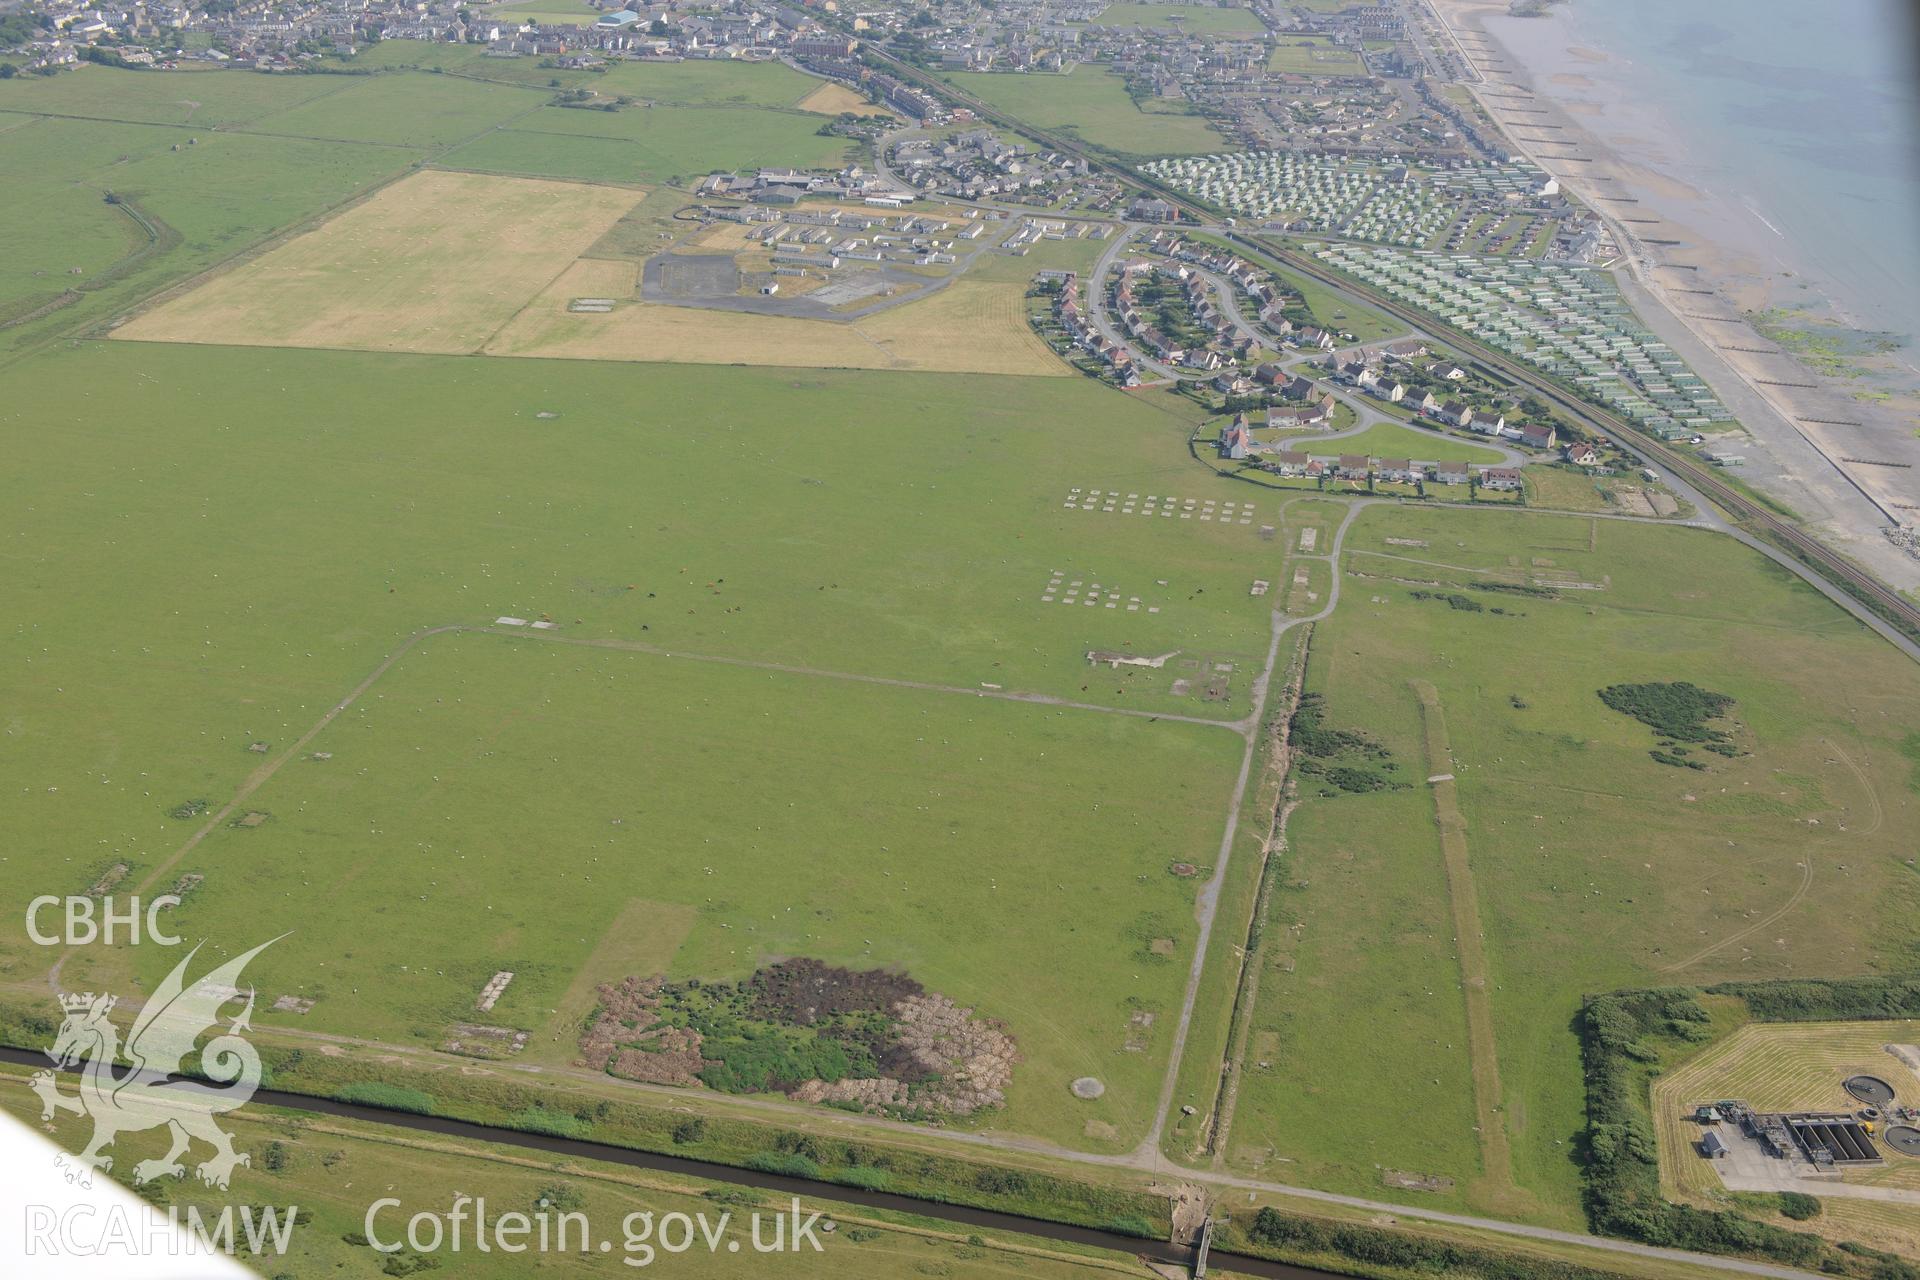 Tywyn airfield, the battle headquarters at Tywyn and the town of Tywyn. Oblique aerial photograph taken during RCAHMW?s programme of archaeological aerial reconnaissance by Toby Driver, 12th July 2013.